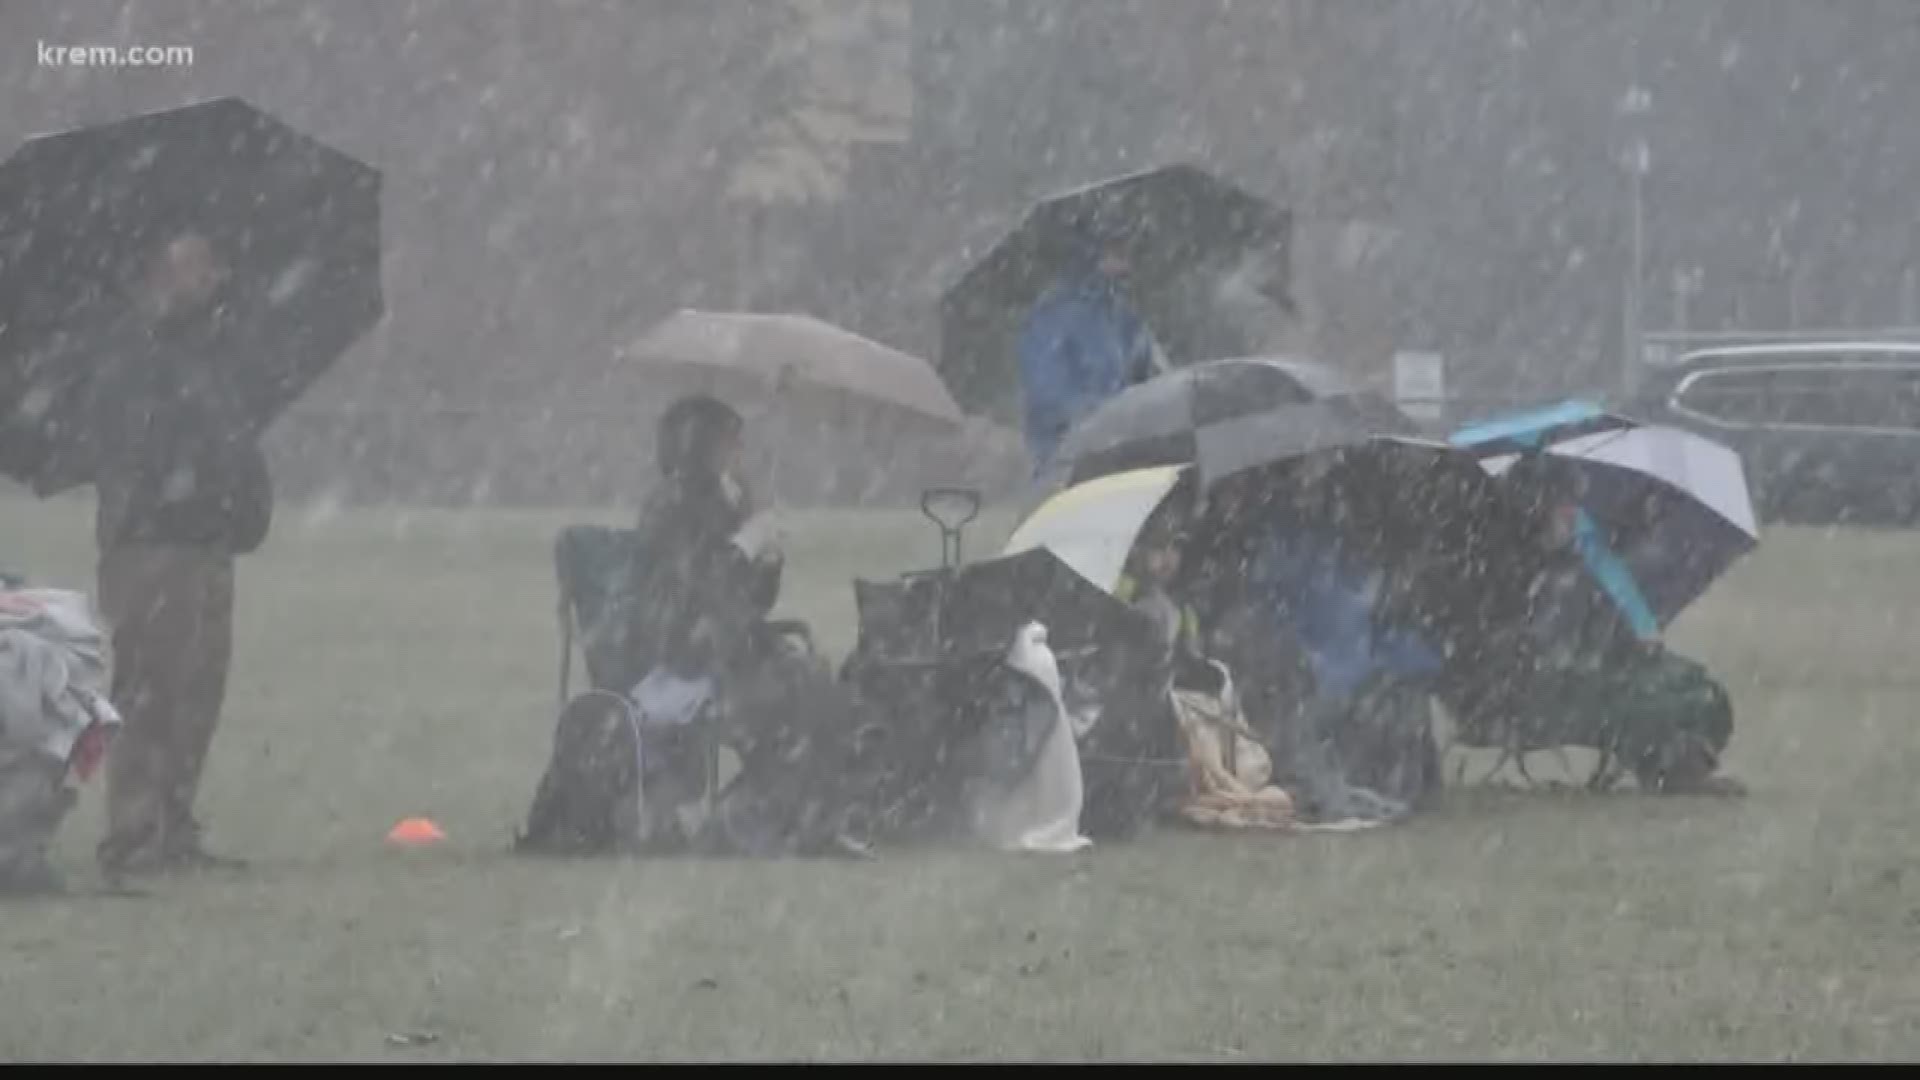 KREM 2's Brandon Jones shows us how a local soccer game made the most of the unexpected snow shower.